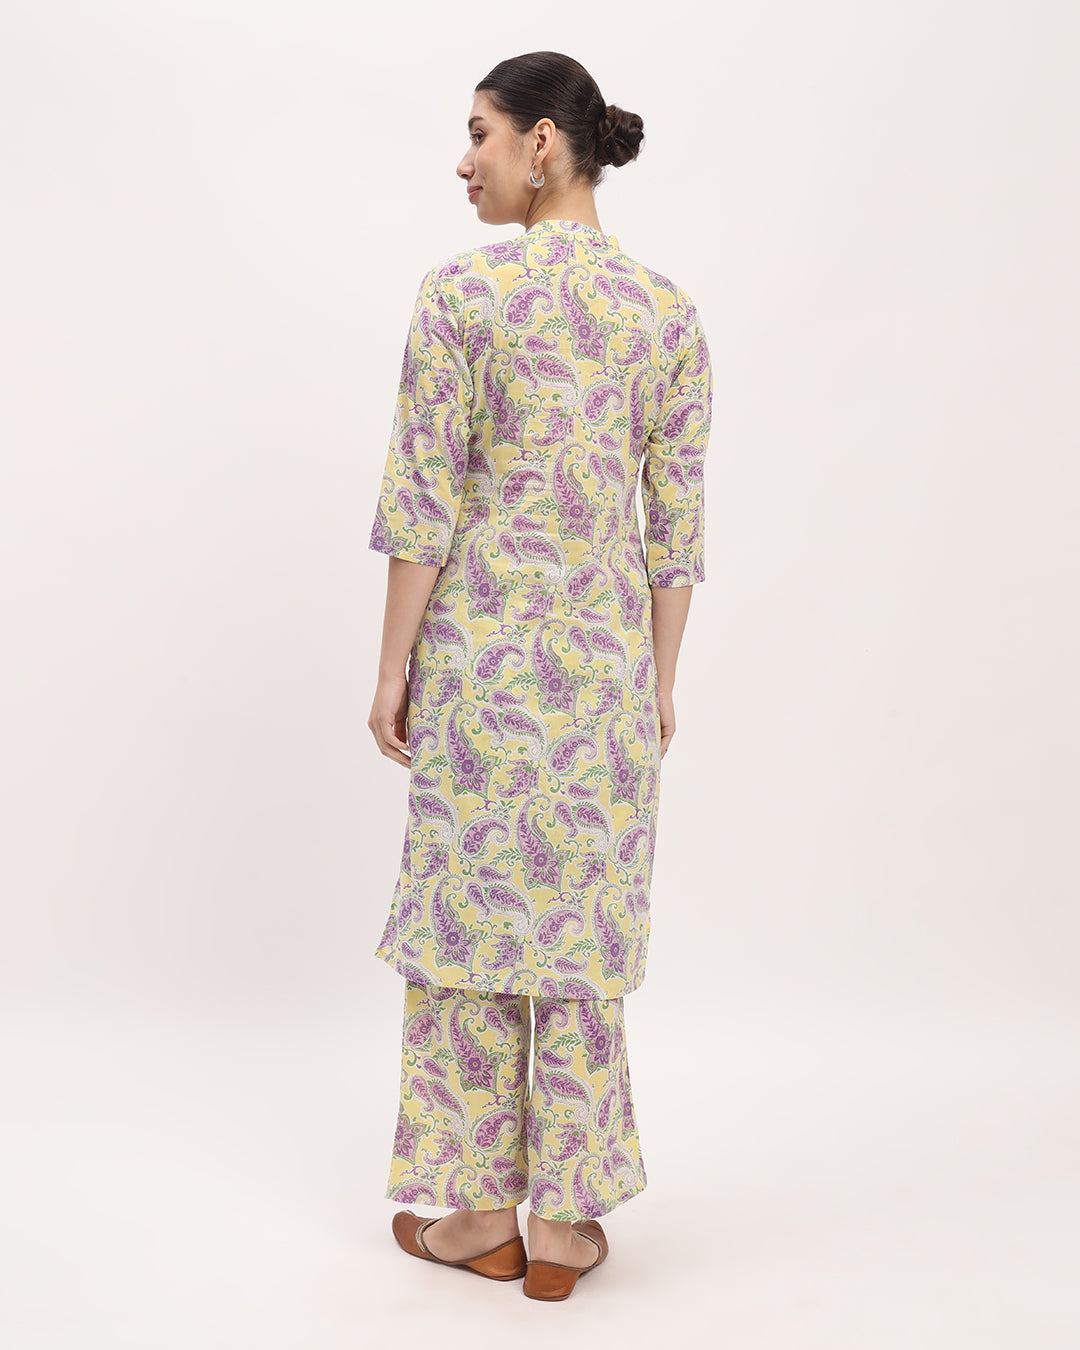 Combo: Lavender Paisley & English Floral Garden High-Low Printed Kurta (Without Bottoms)